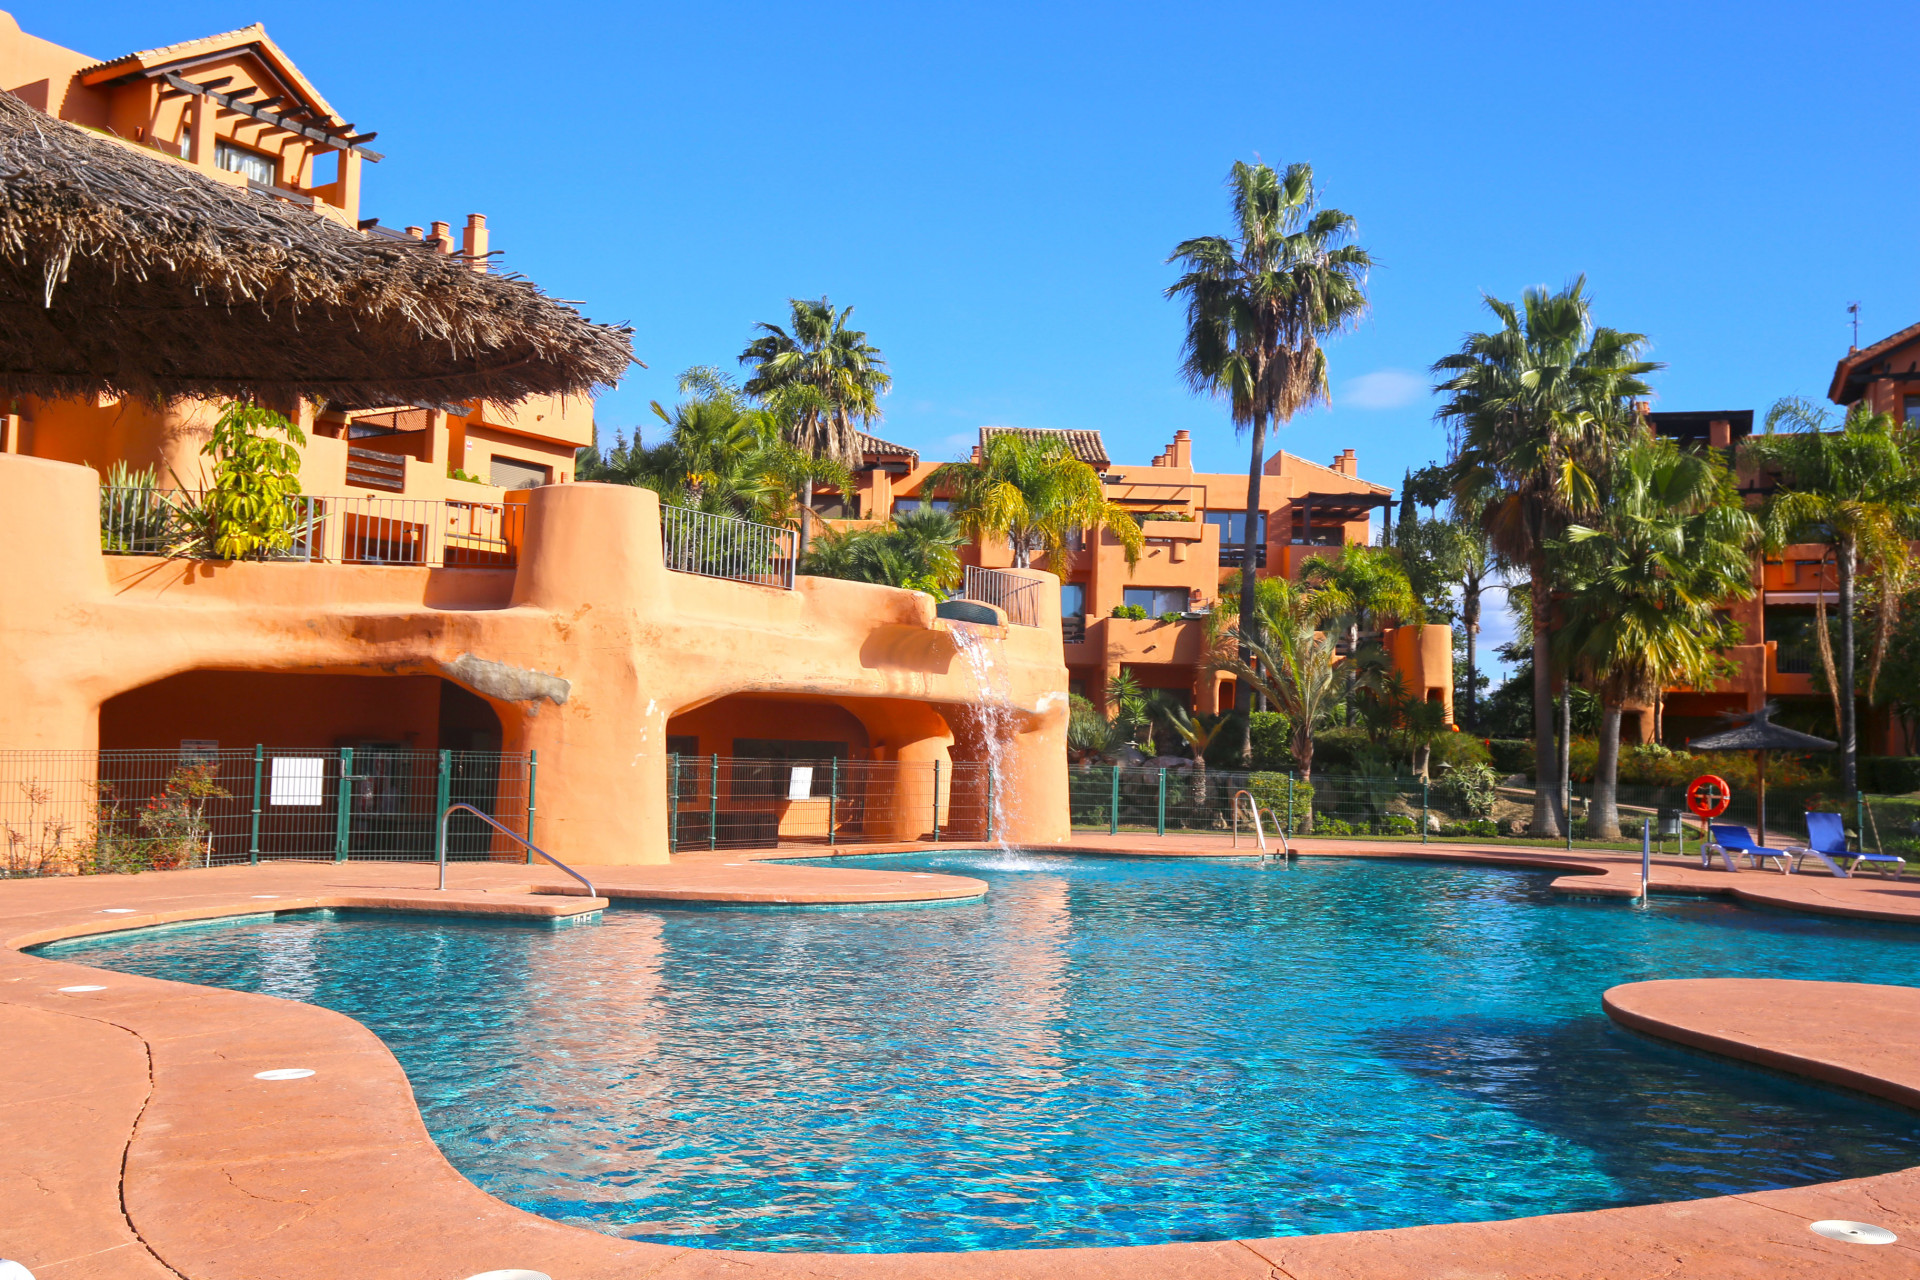 Fantastic one bedroom south west facing apartment in the gated community Sotoserena, Estepona